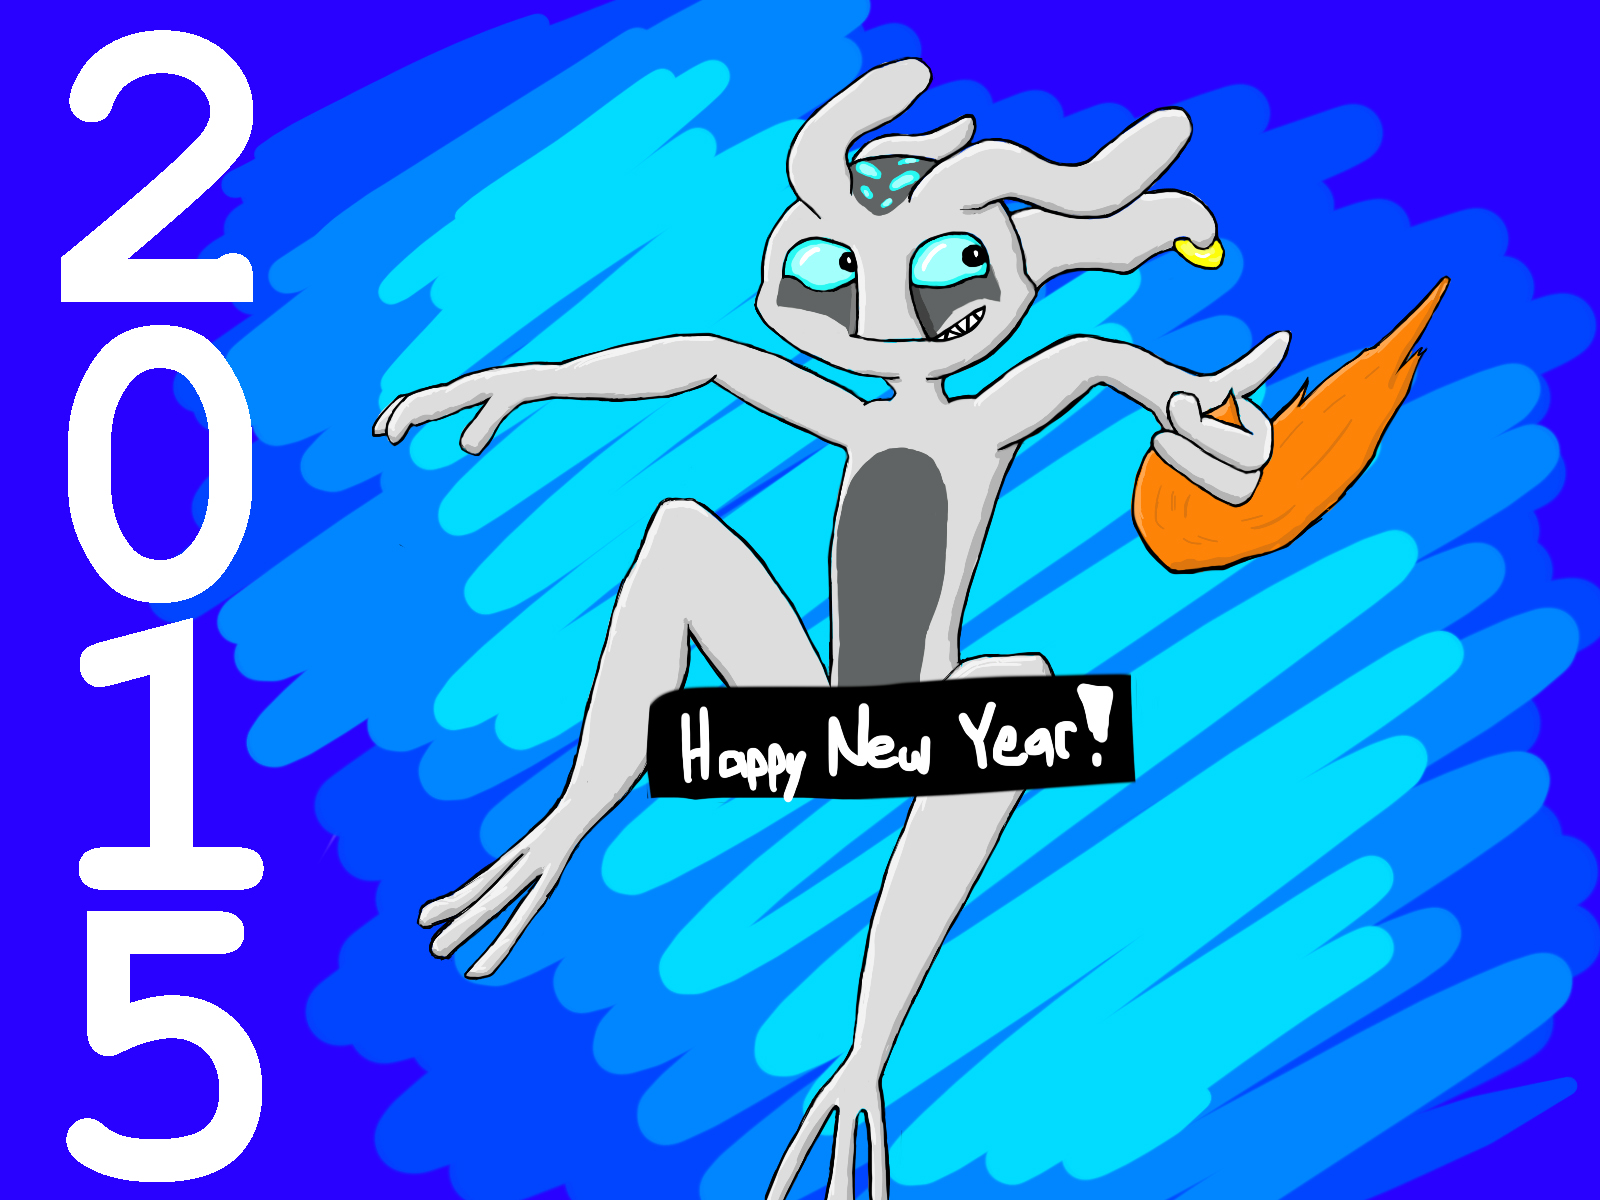 Happy New Year 2015 by Xtreme2252